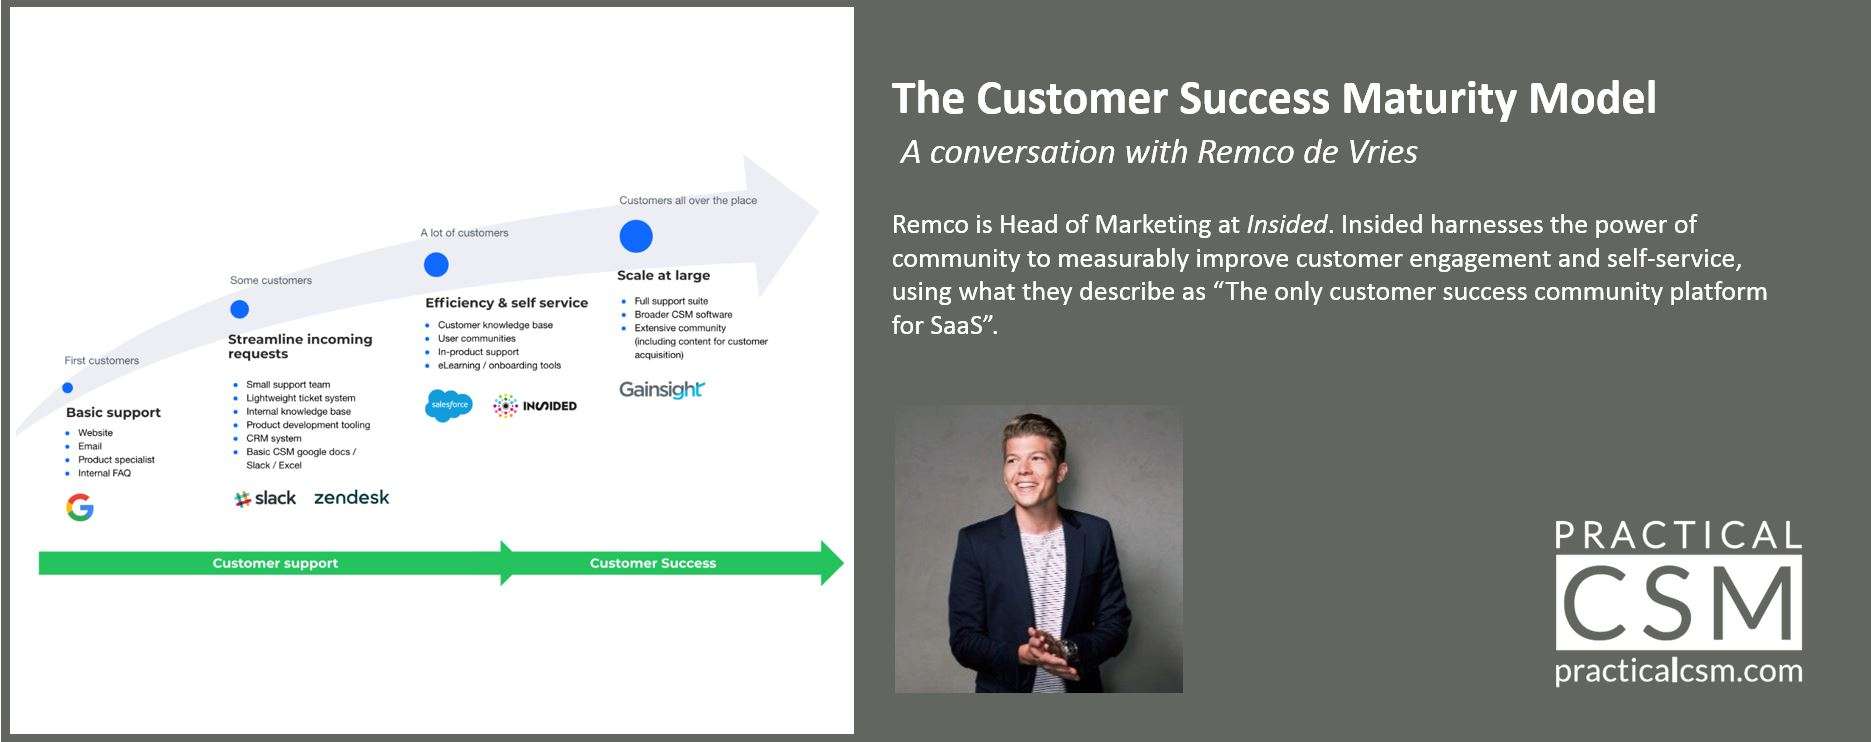 The Customer Success Maturity Model with Remco de Vries - Practical CSM